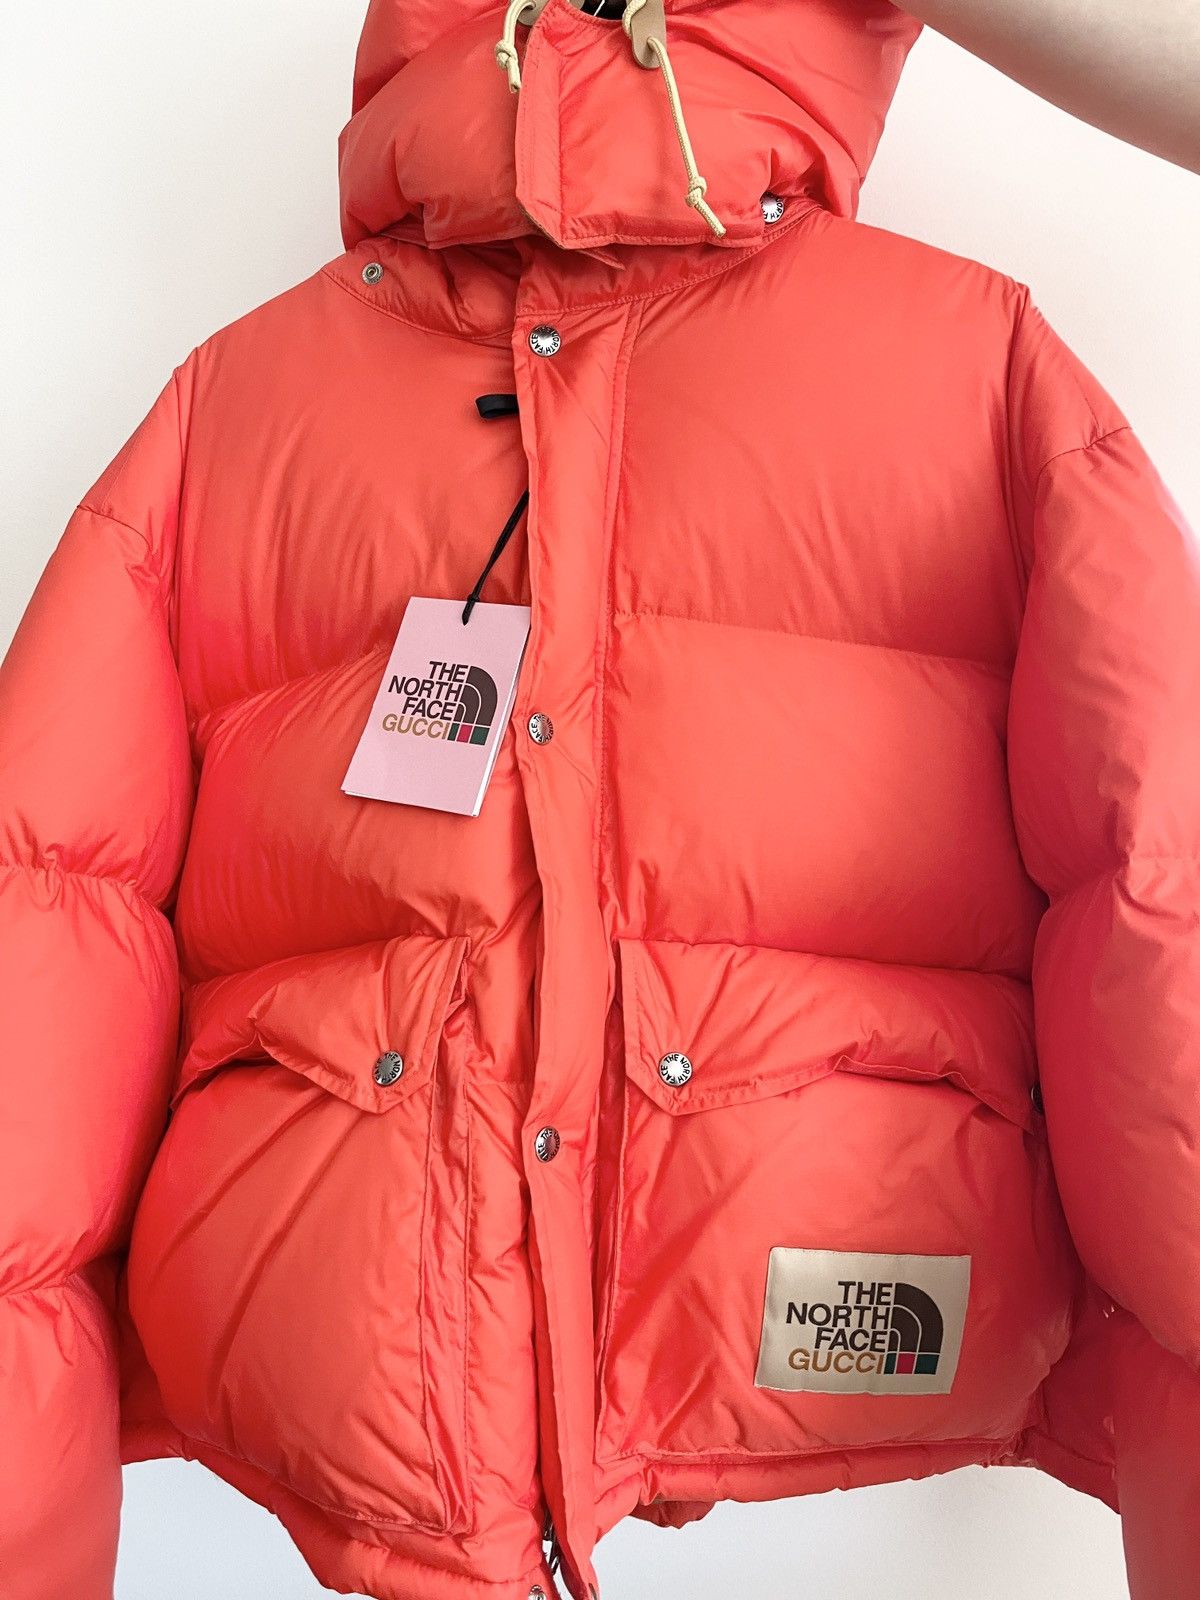 GRAIL! 2021 Gucci x The North Face Puffer Jacket in Large - 4